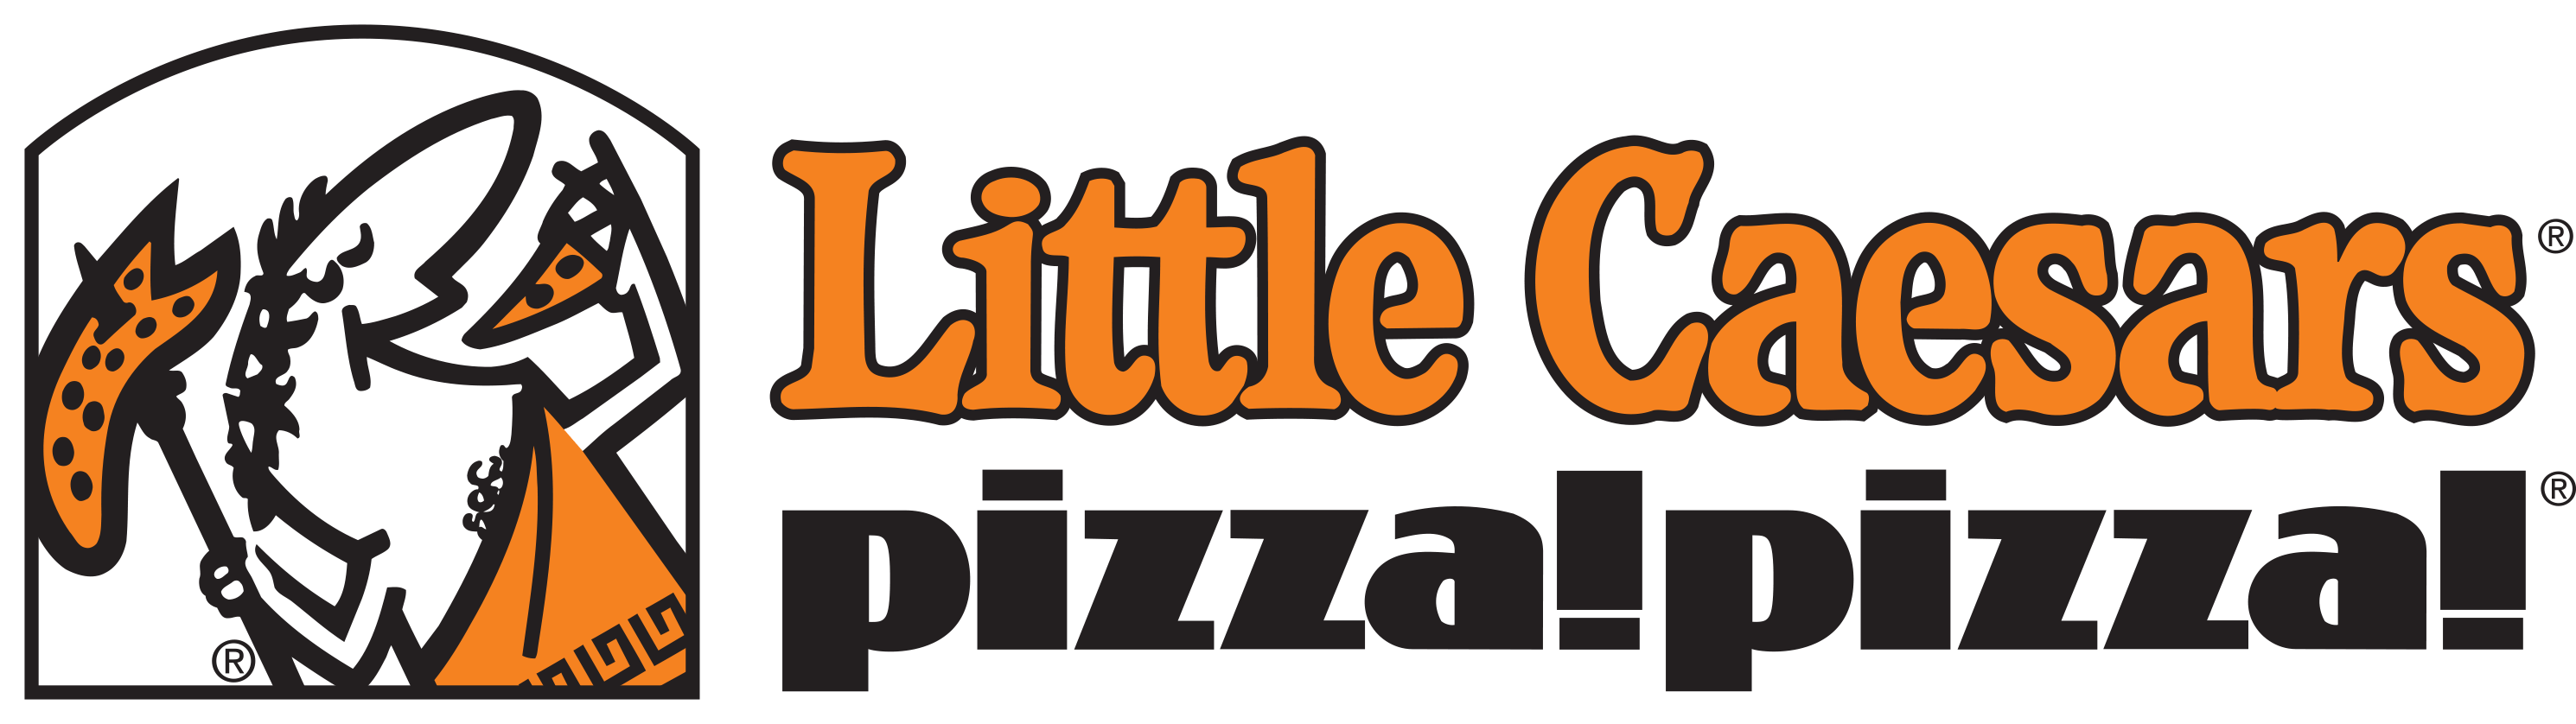 Lil Caesar Pizza Logo - Lessons Radio Can Learn from Little Caesars Founder Mike Ilitch